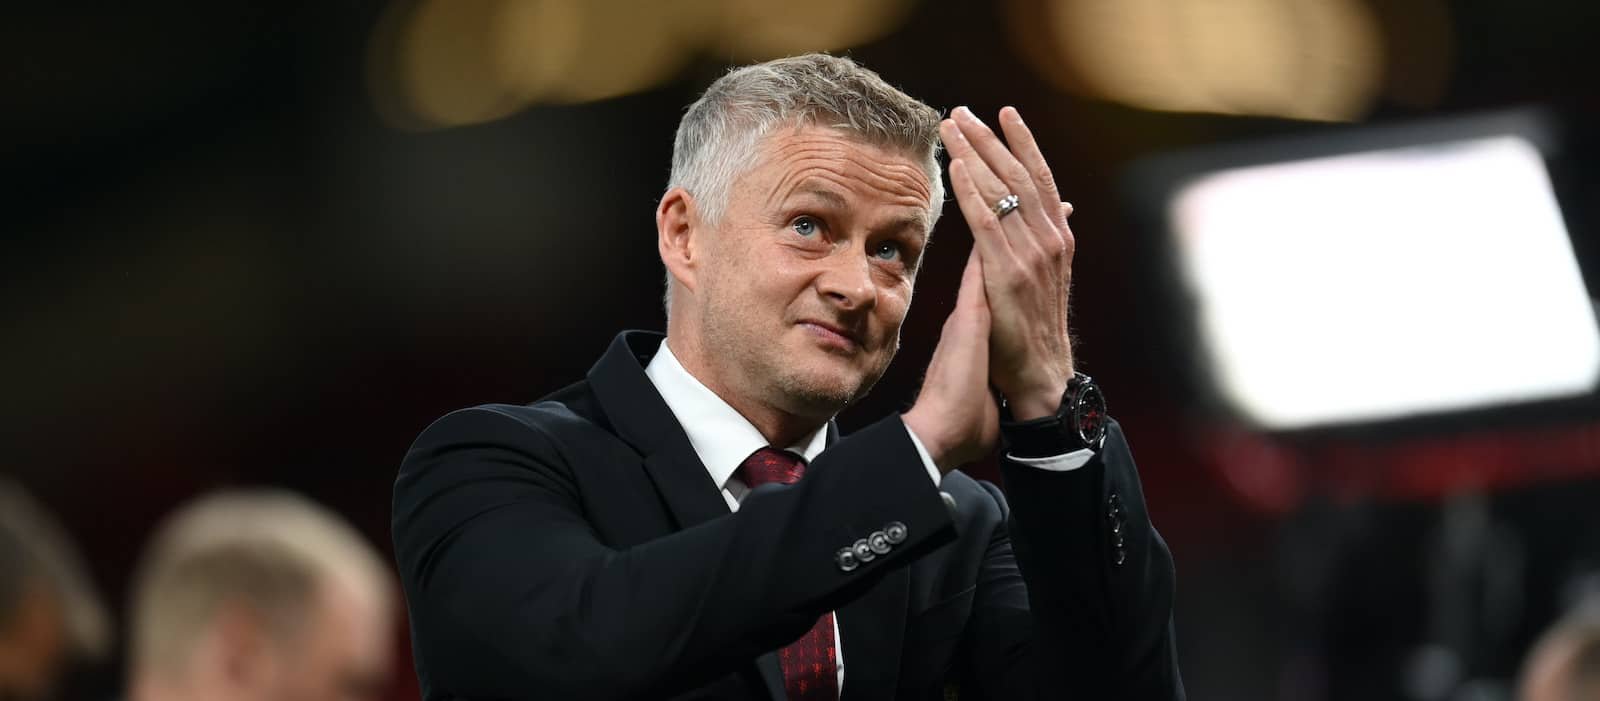 Ole Gunnar Solskjaer reveals that his players stopped running or caring in final game as manager – Man United News And Transfer News